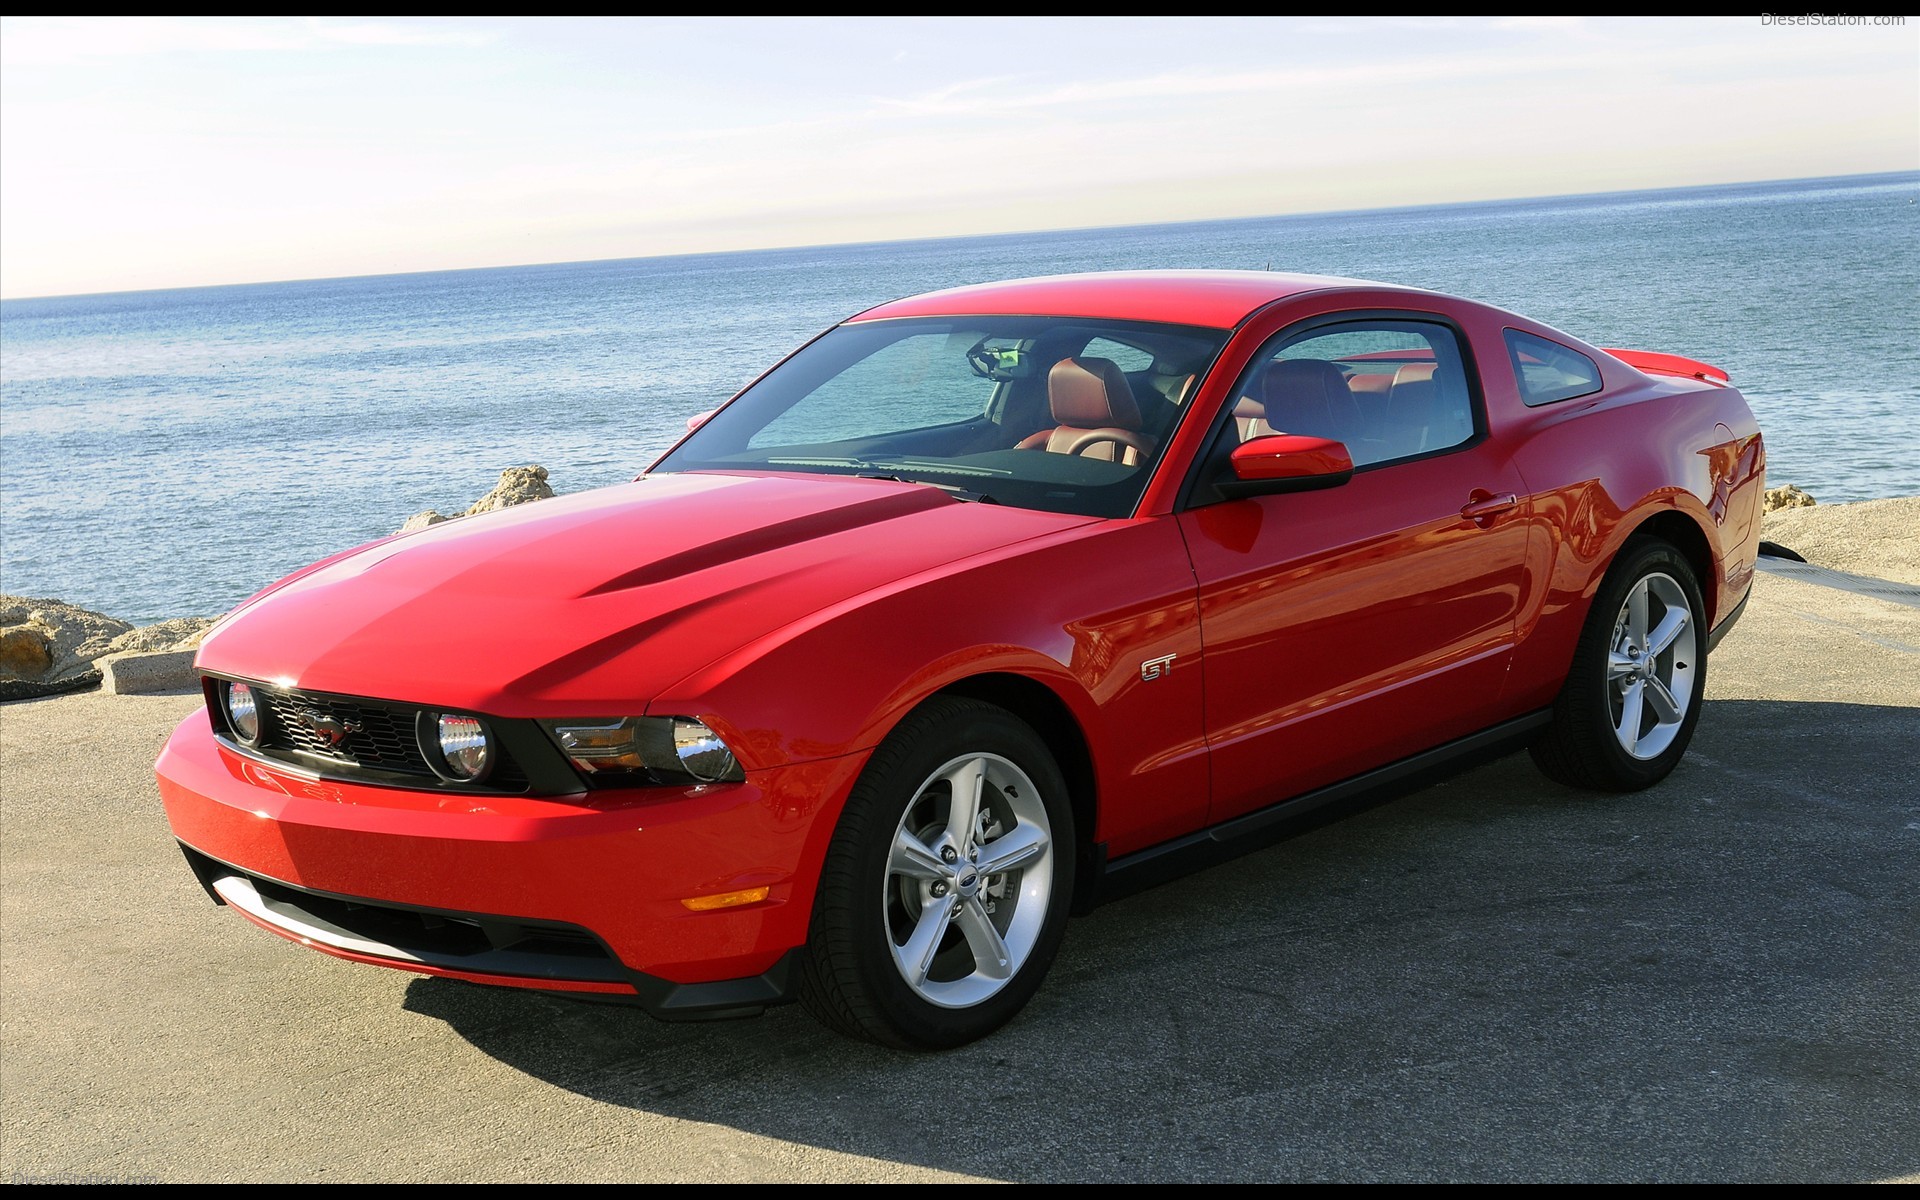 Ford Mustang Gt Widescreen Exotic Car Image Of Diesel